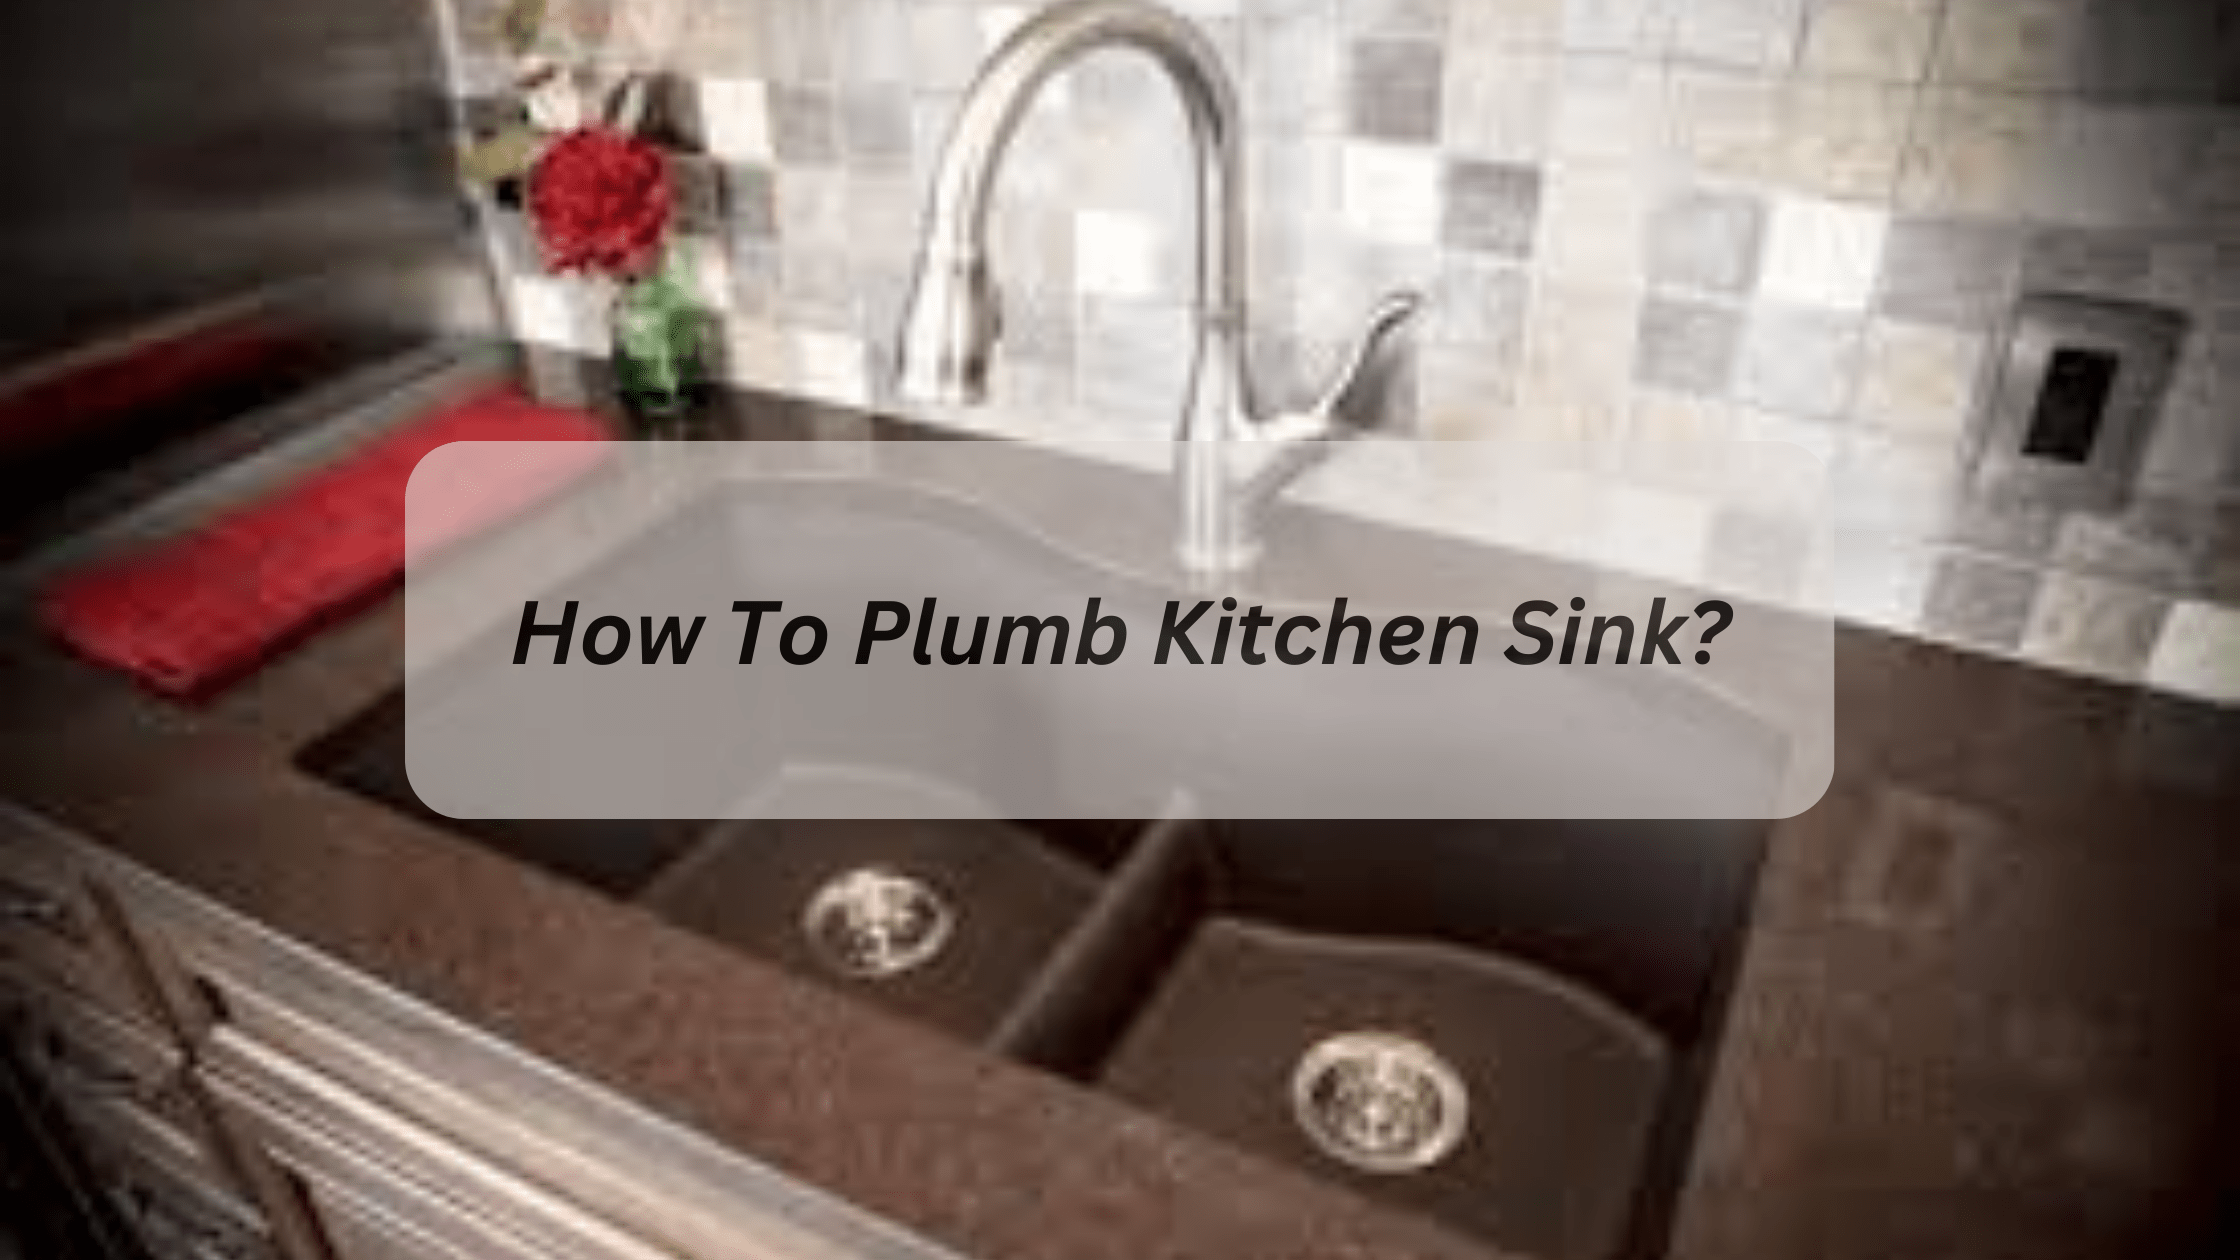 How To Plumb Kitchen Sink?